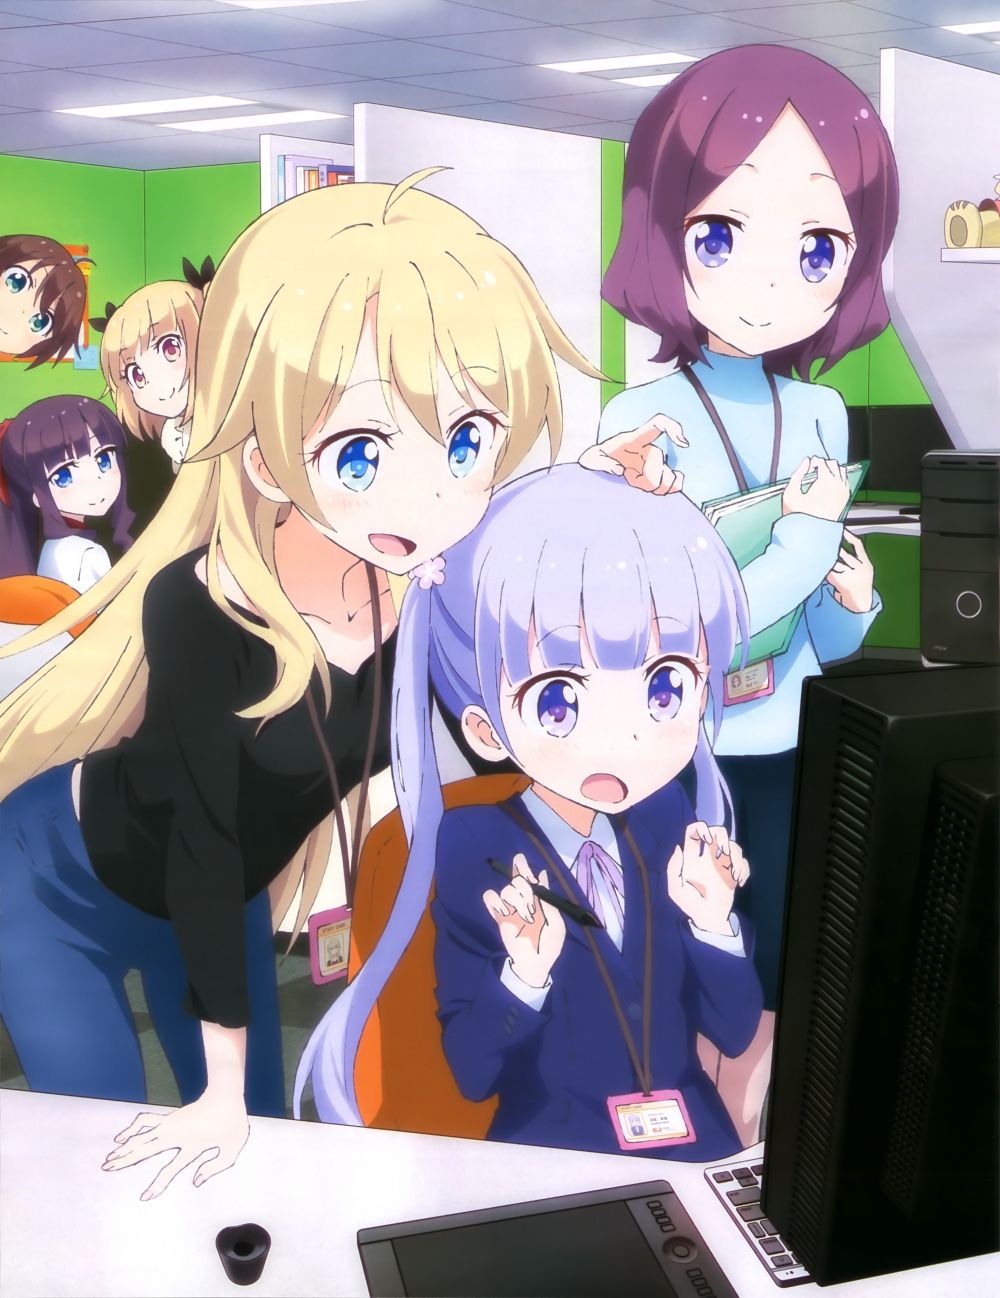 NEW GAME! | page 2 of 36 - Zerochan Anime Image Board